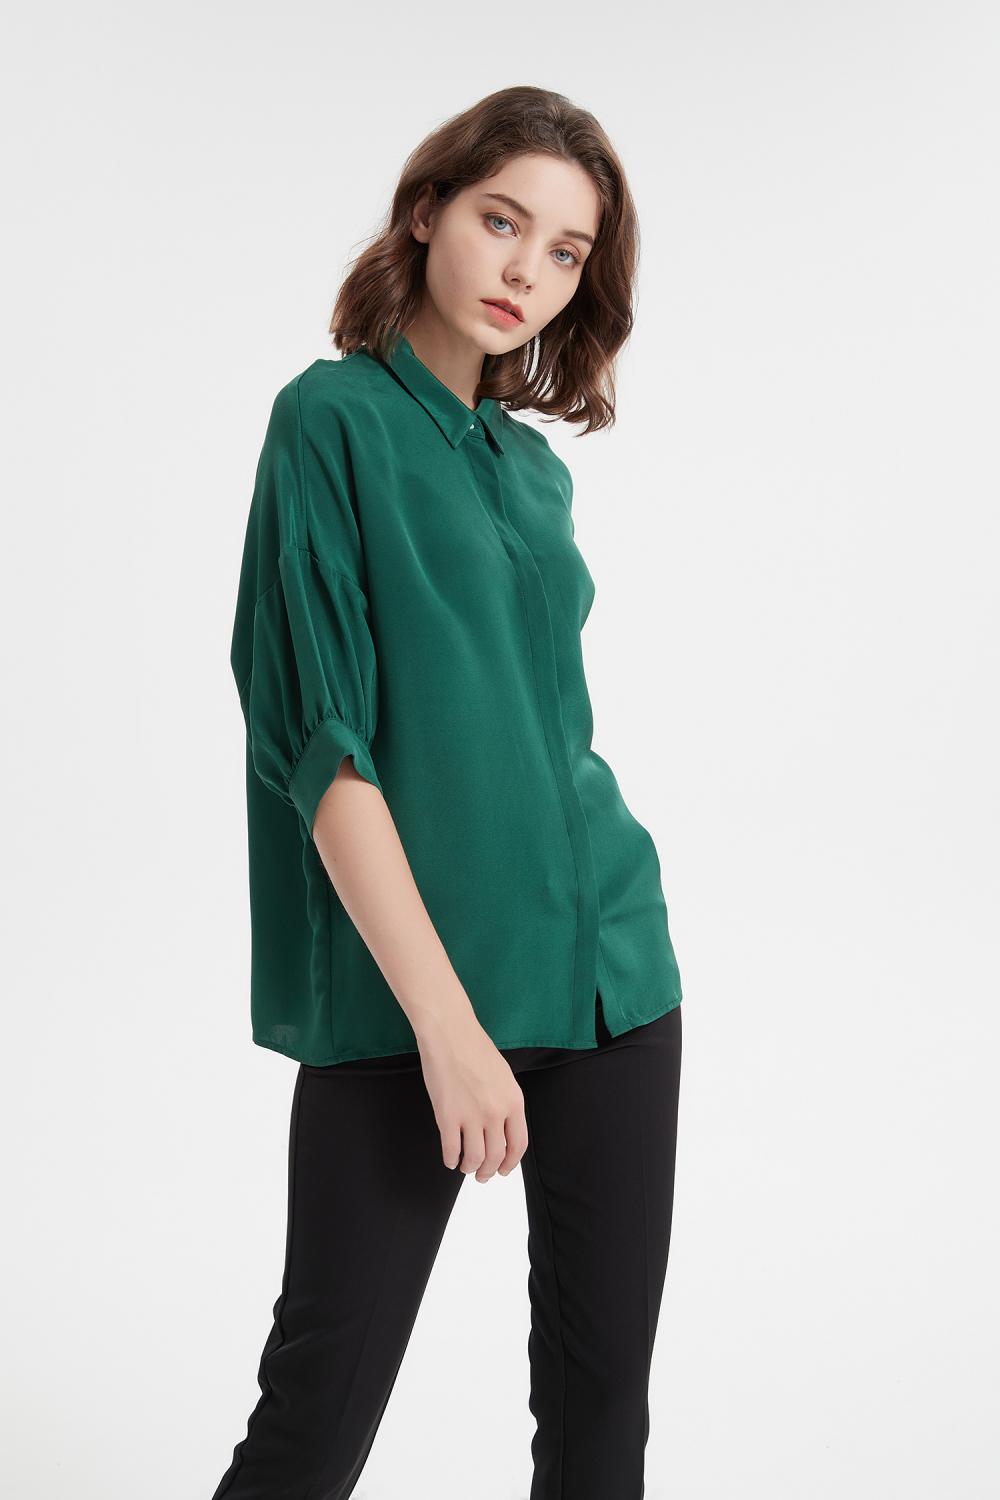 Top Quality Silk Blouse